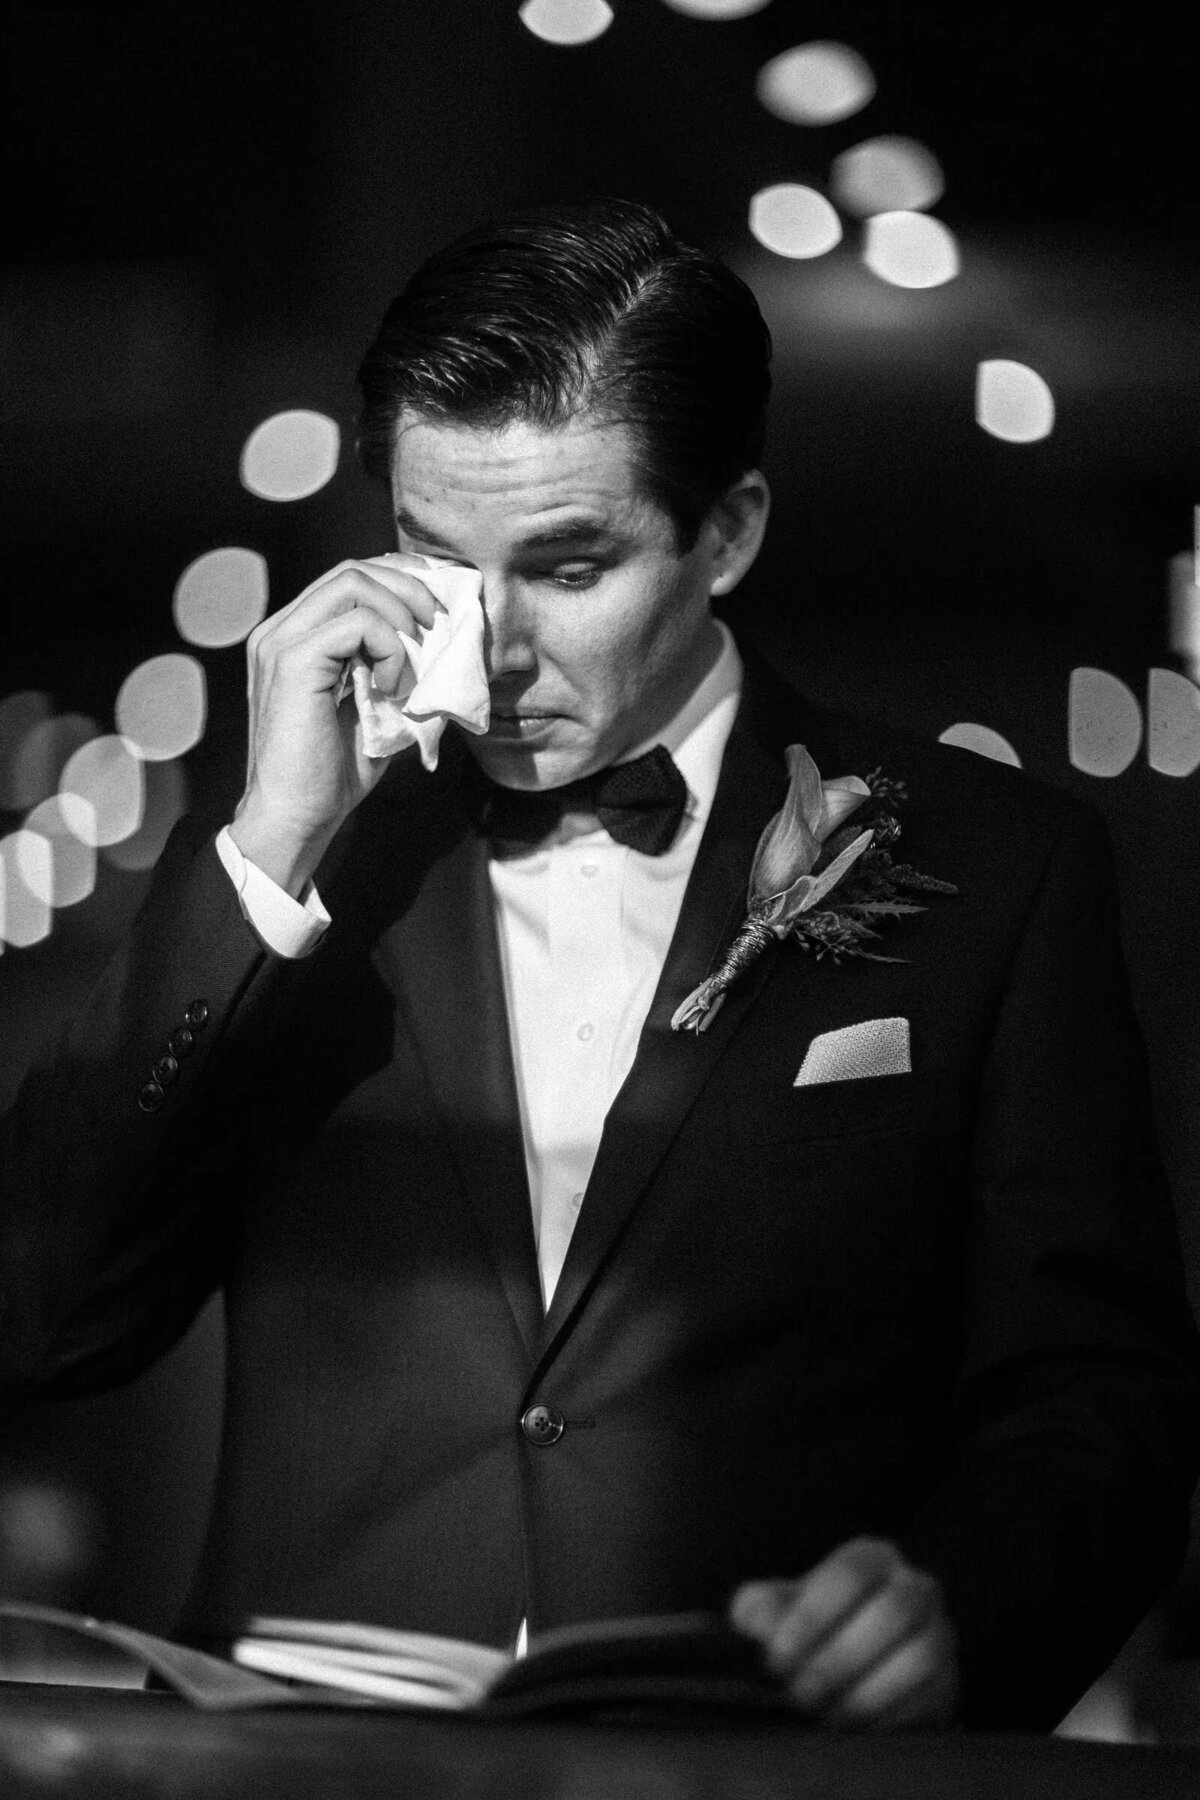 A groom emotionally wipes a tear from his eyes during a speech, set against a backdrop of soft, glowing lights.